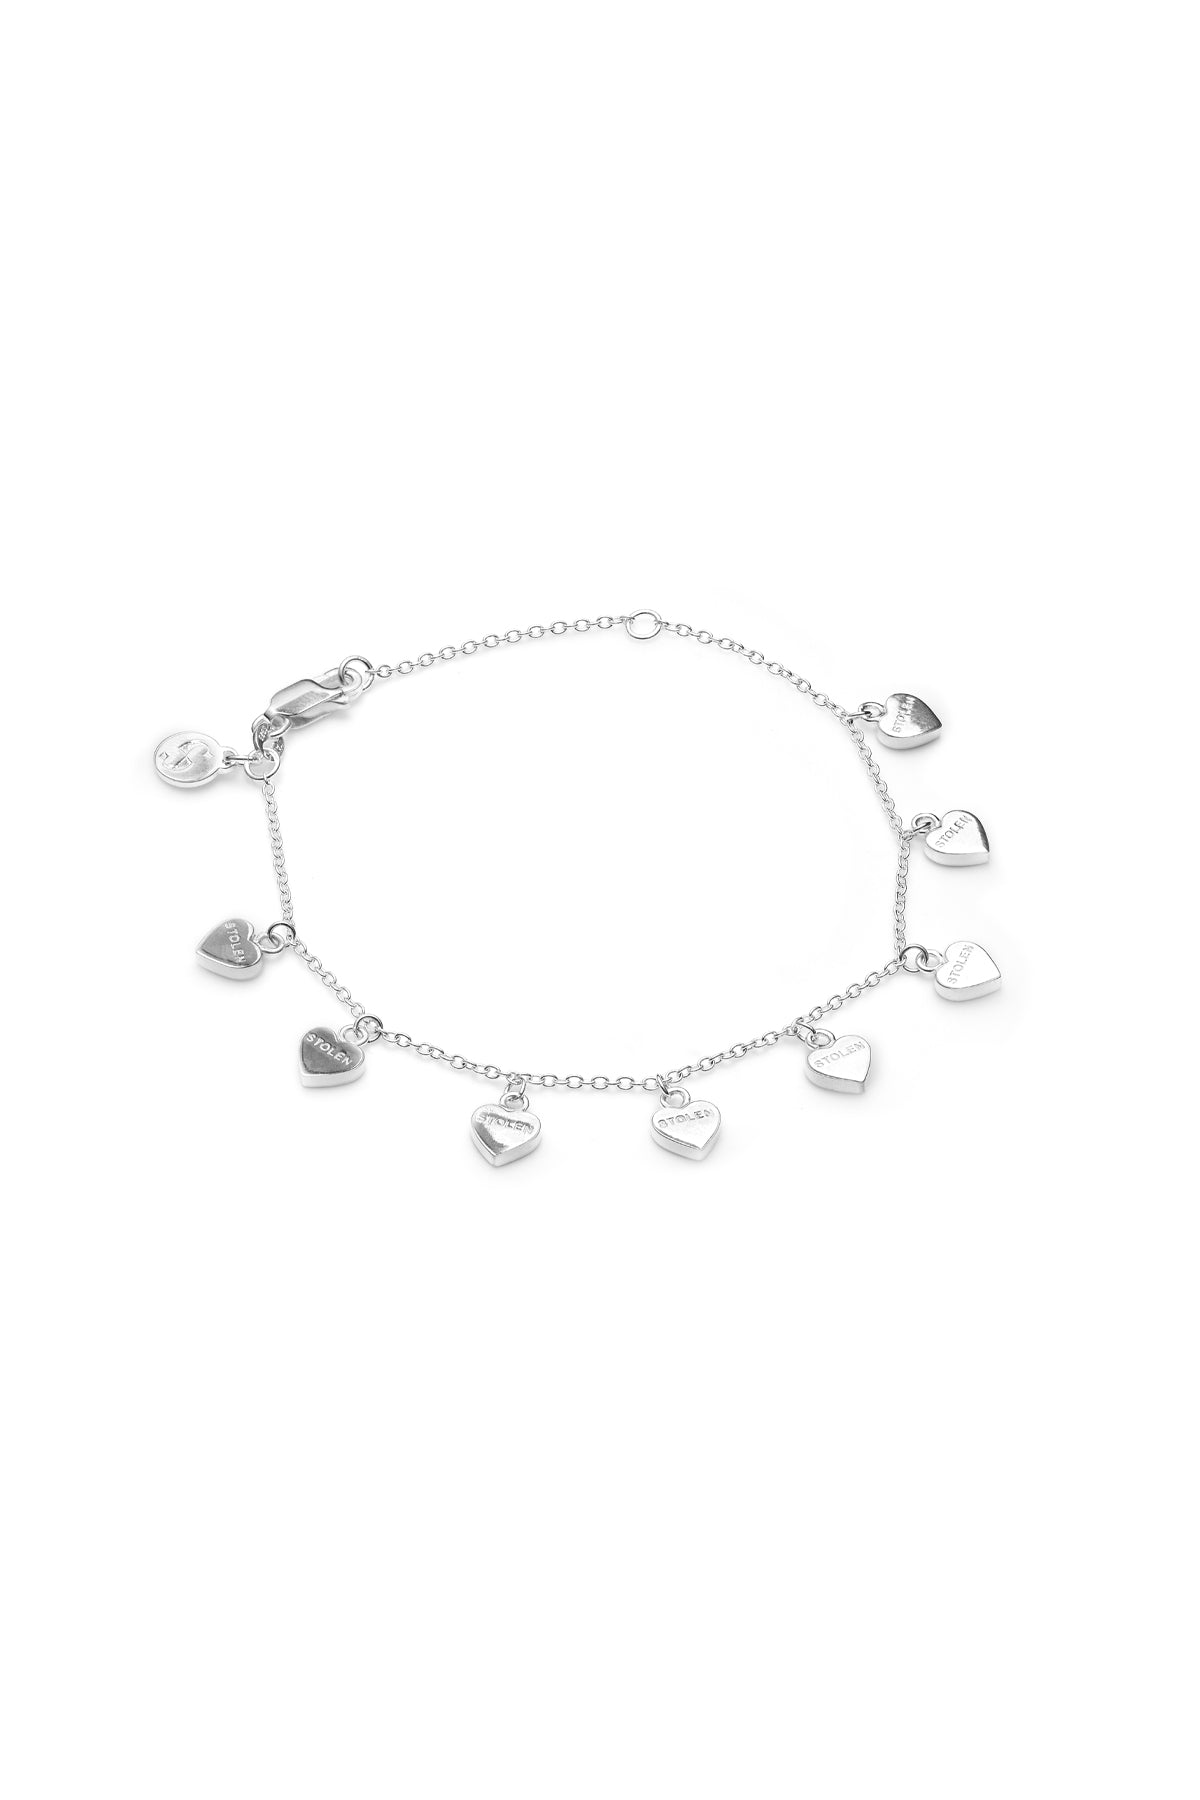 STOLEN GIRLFRIENDS CLUB STOLEN HEART BRACELET  The Stolen Girlfriends Club Stolen Heart Bracelet is a delicate bracelet featuring eight mini hearts, all connected to the fine chain in a hanging charm style, closing with a thick clasp. Layer with other Stolen bracelets, or alone for some simple sophistication.      19cm chain length      High polished sterling silver     Comes in a Stolen Girlfriends Club jewellery box